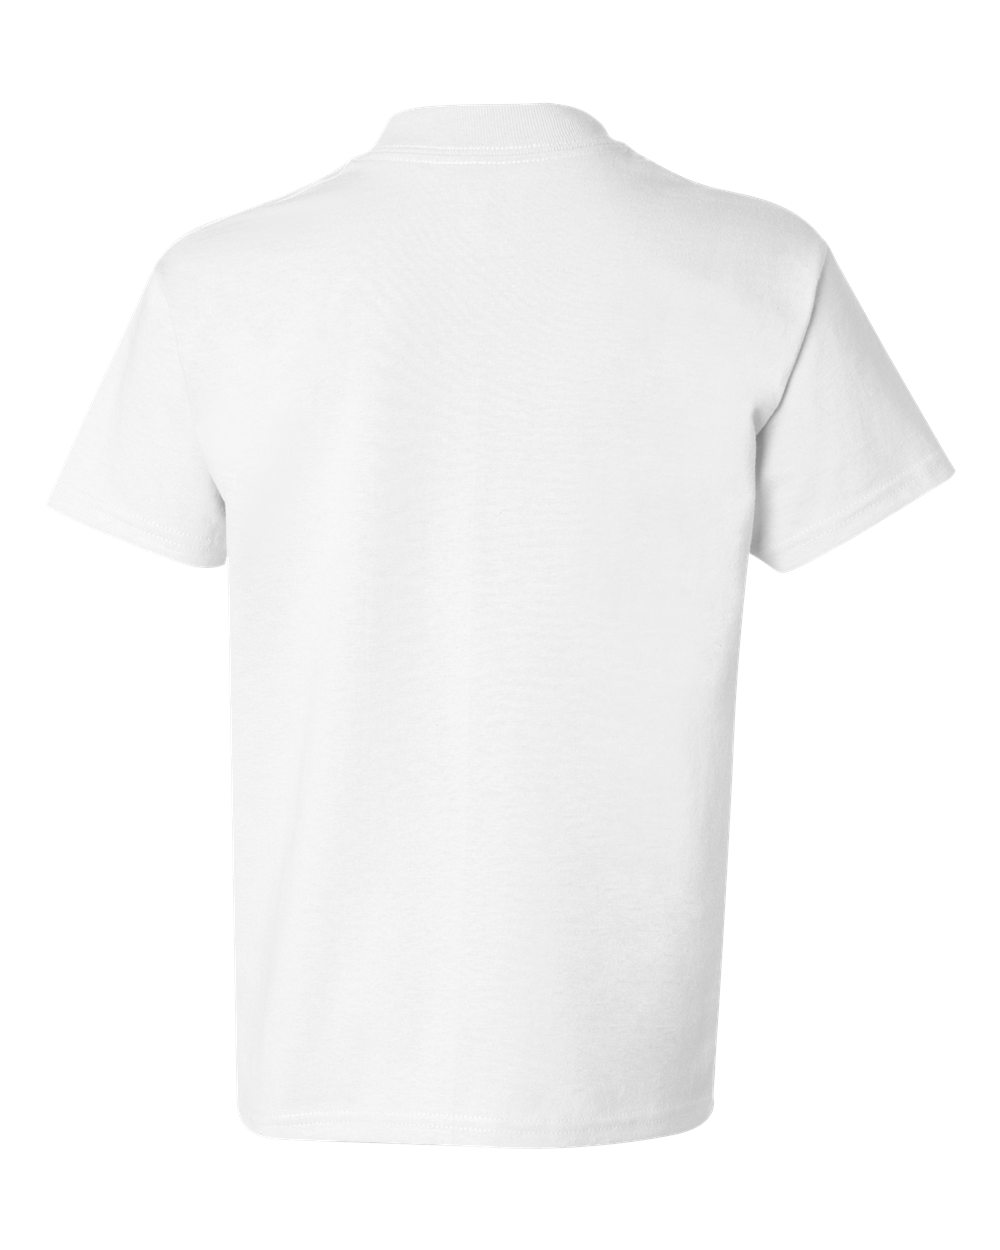 Hanes 5450 - Authentic Youth T-Shirt